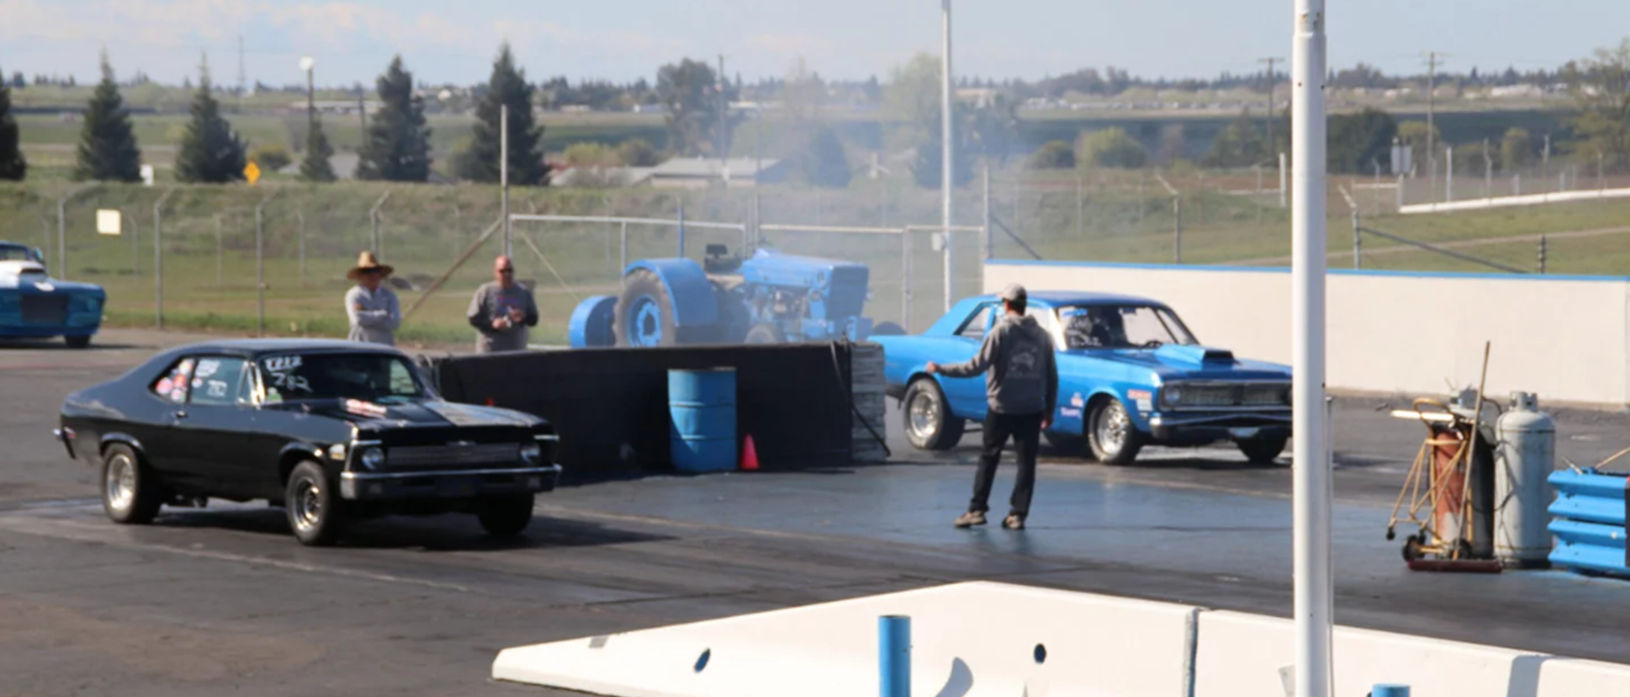 cars on the starting line of a drag strip